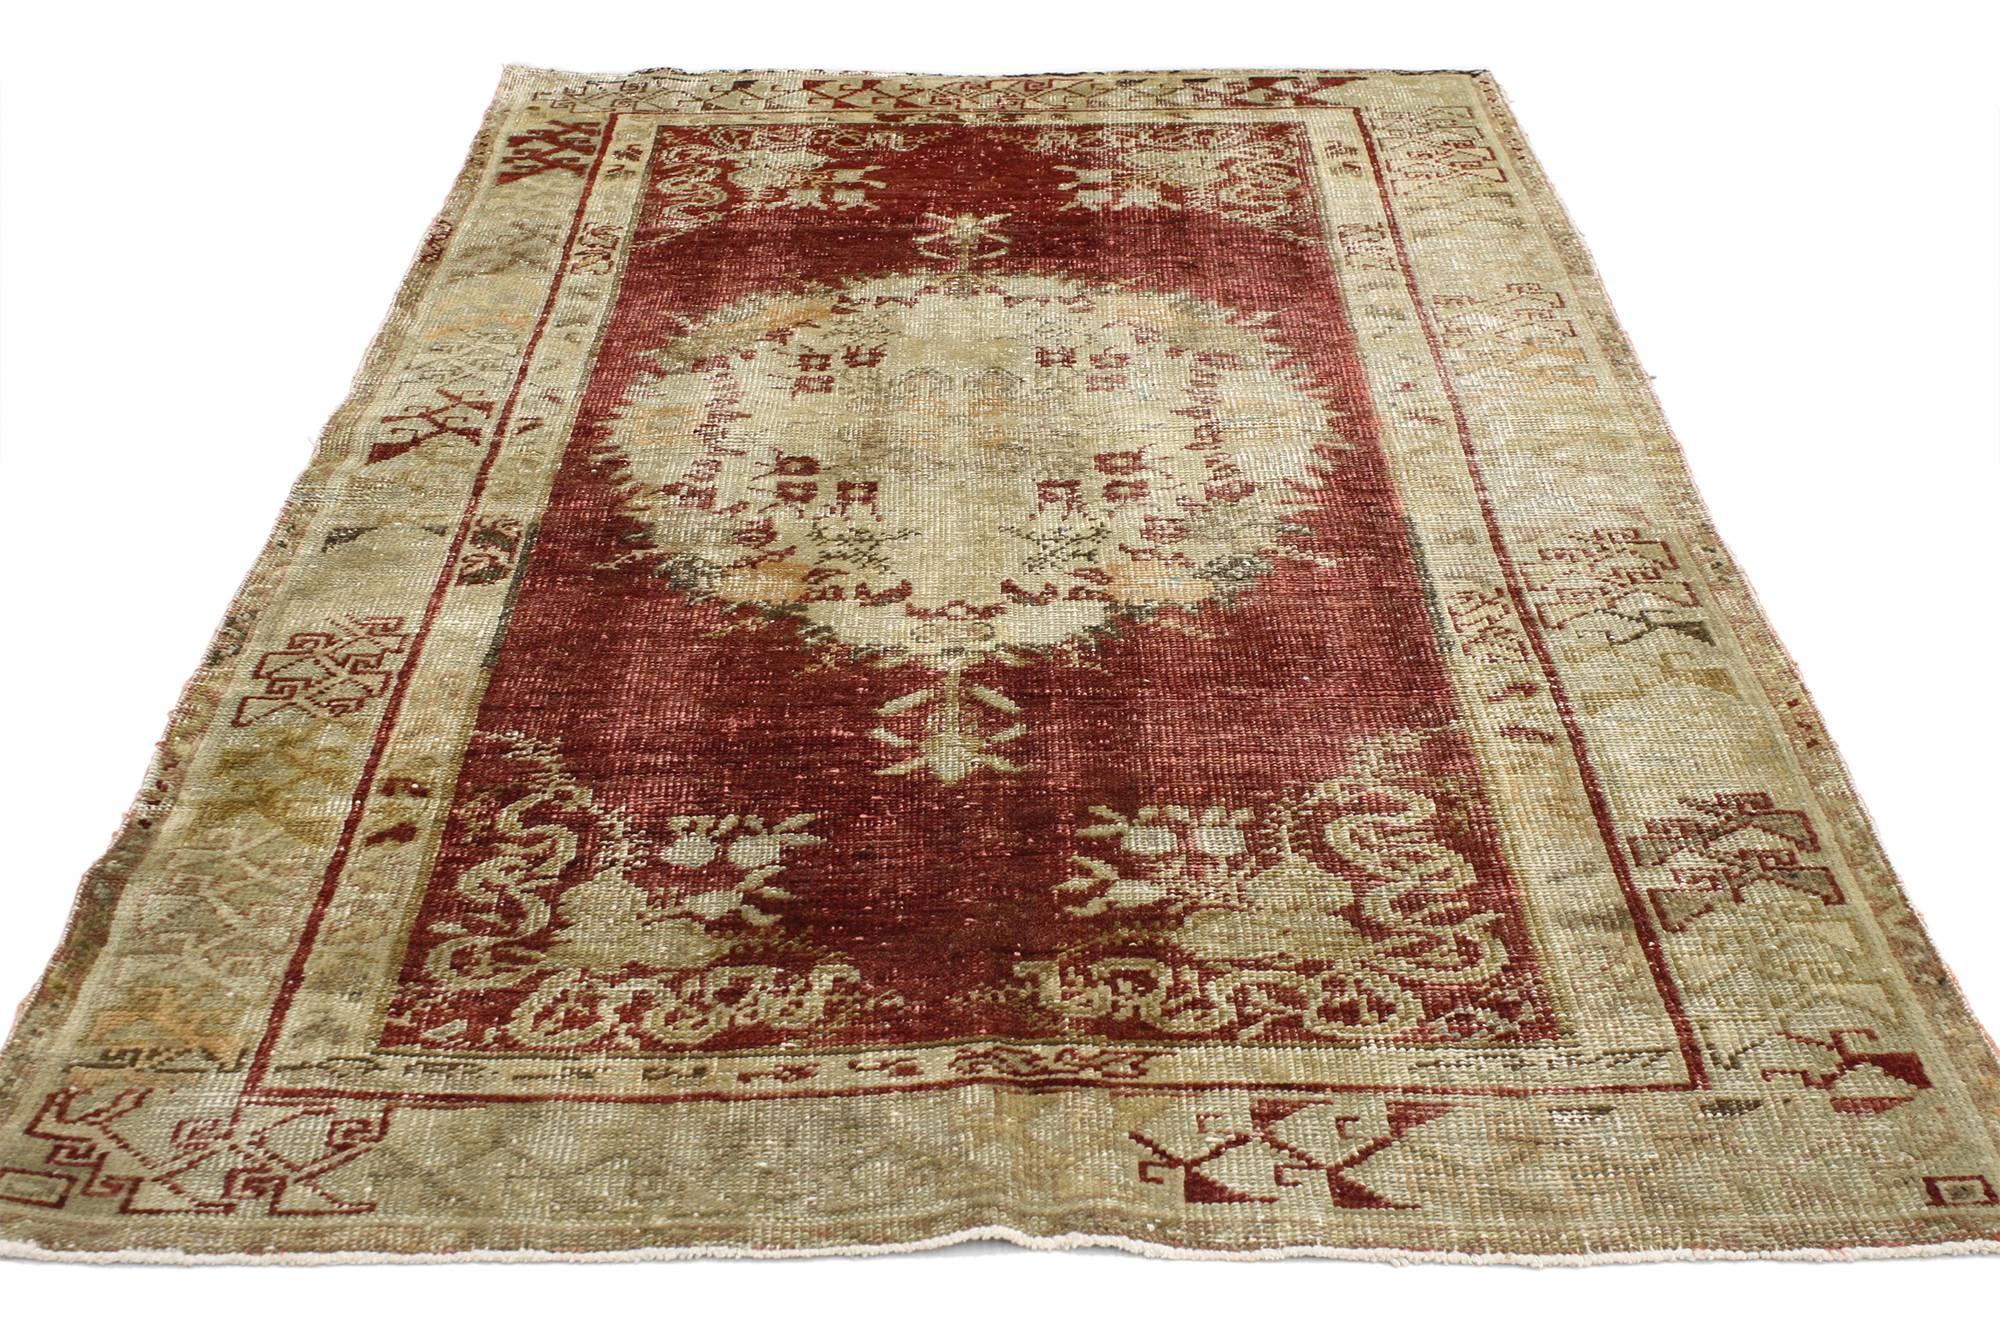 52078, Rustic style distressed vintage Turkish Oushak rug, kitchen, foyer or entry rug. This vintage Turkish Oushak rug features a modern rustic style composed of a round central medallion in an abrashed field. Immersed in Anatolian history and